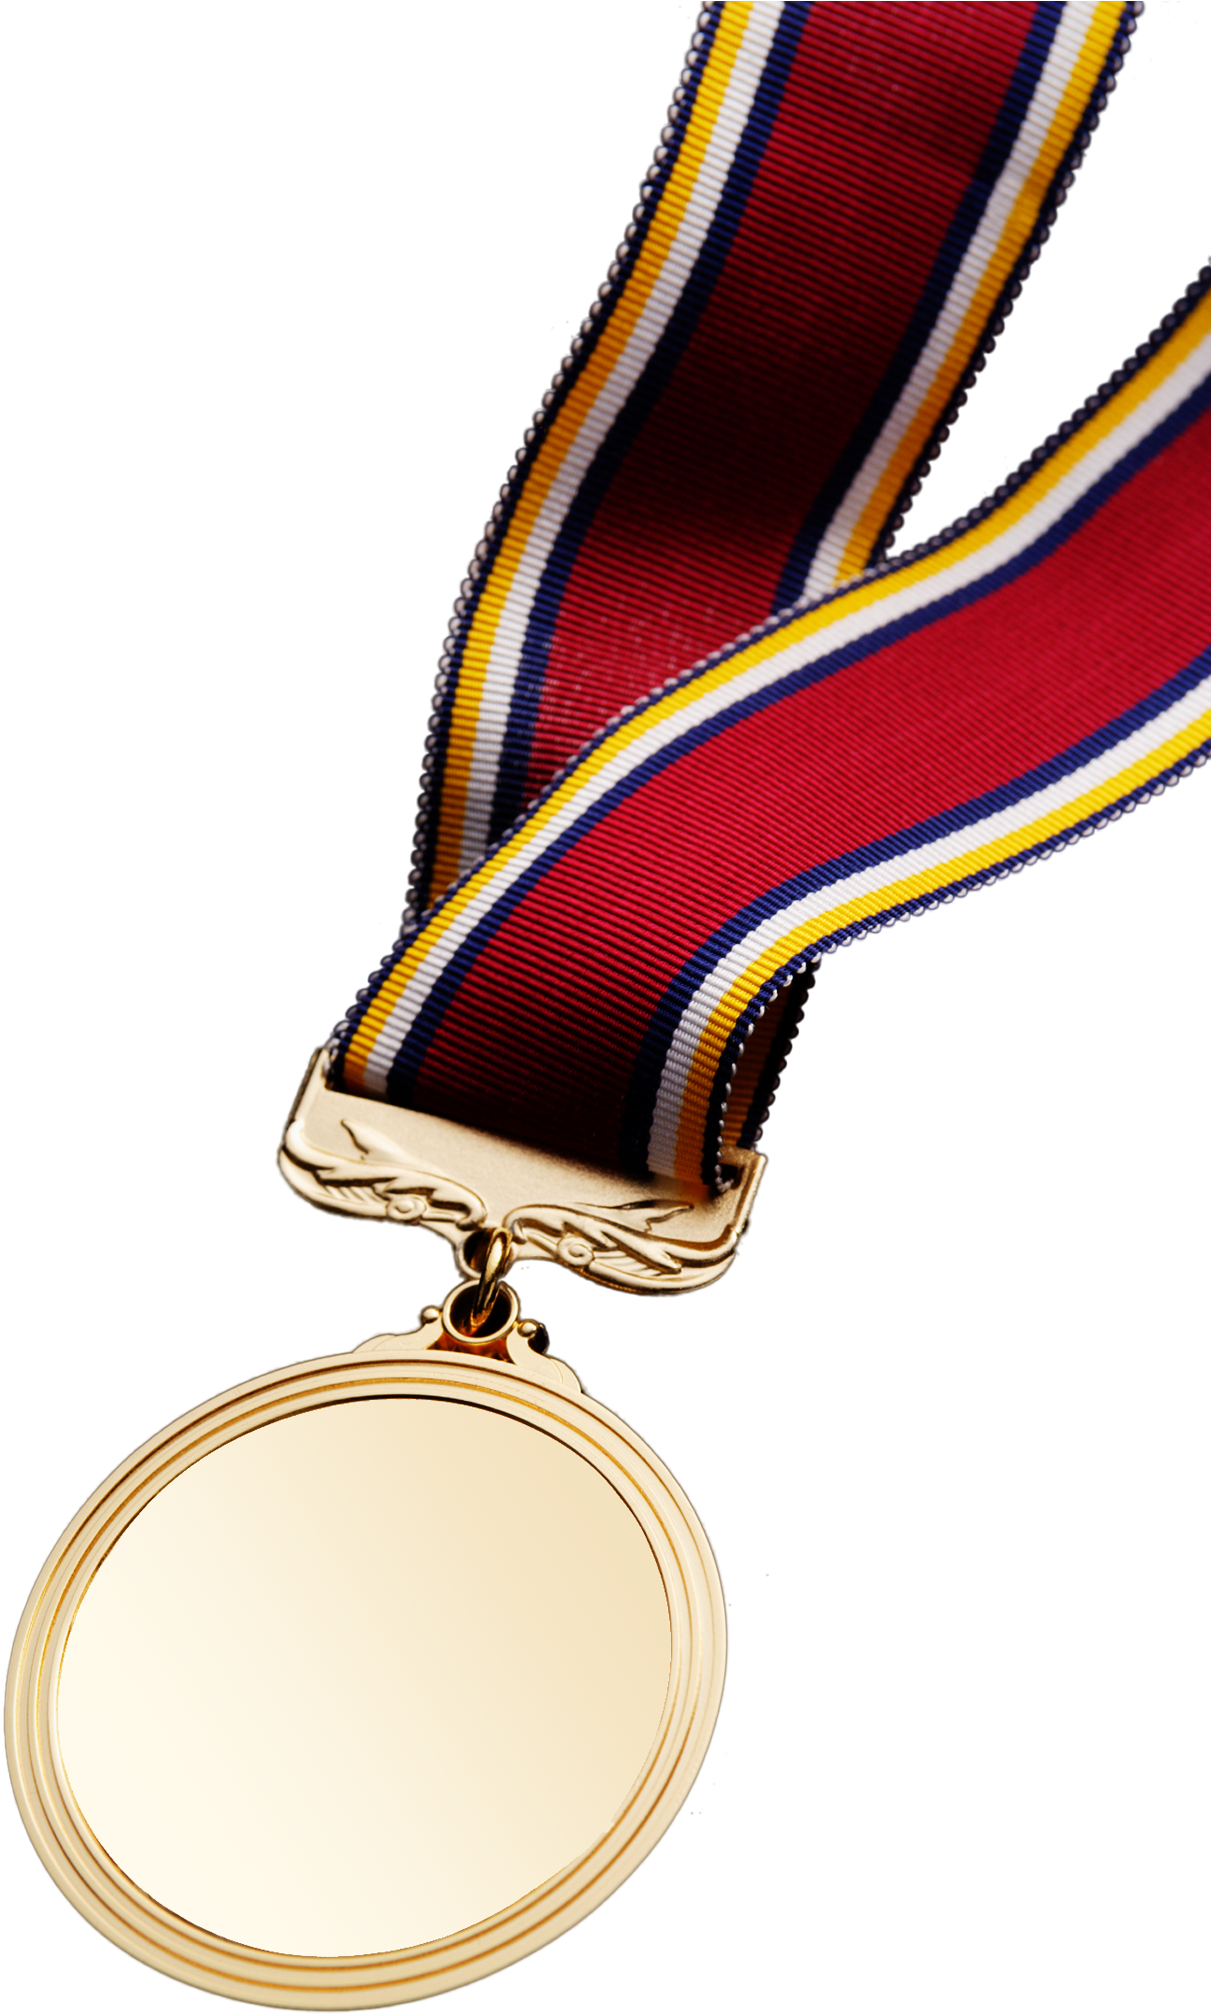 Gold Medal With Red Strap